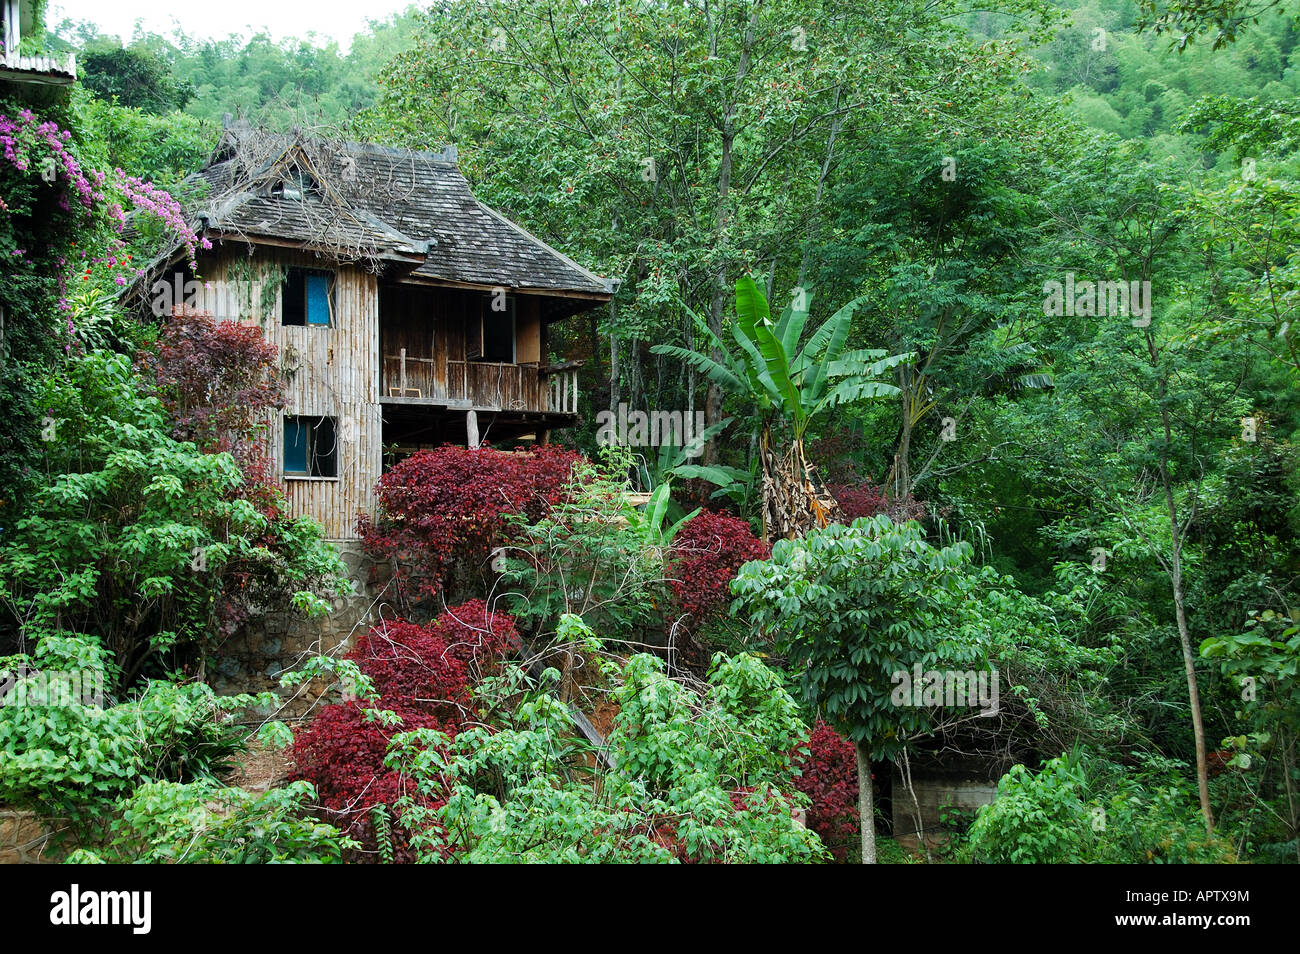 A traditional wooden house in the lush green of the Xishuanbanna rain forest. Xishuanbanna district, Yunnan, China. Stock Photo